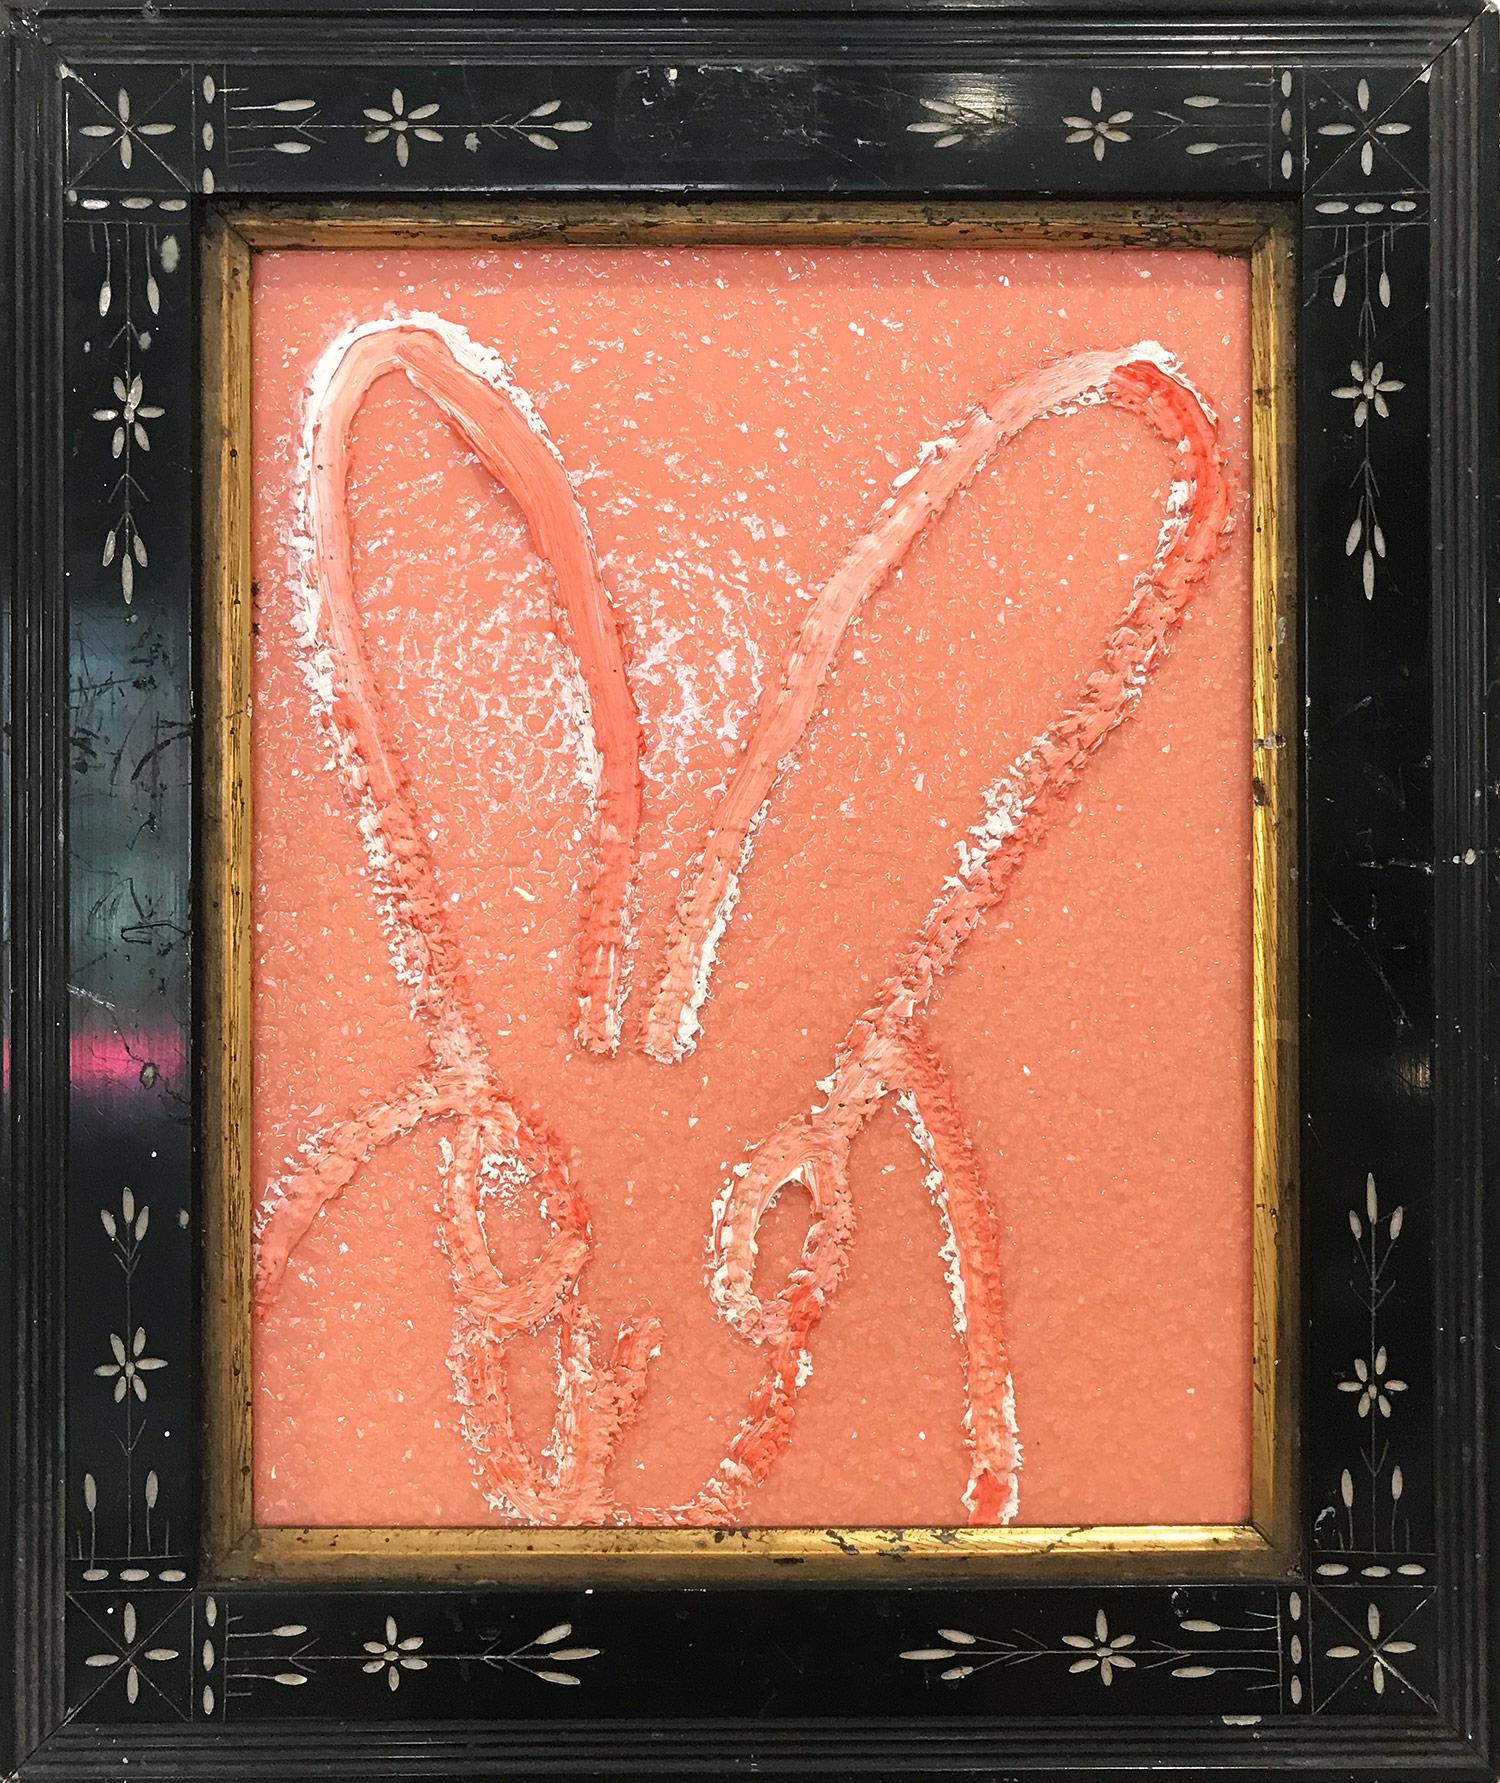 Hunt Slonem Abstract Painting - "Untitled" (Resin and Diamond Dust Bunny on Peach) Oil Painting on Wood Panel